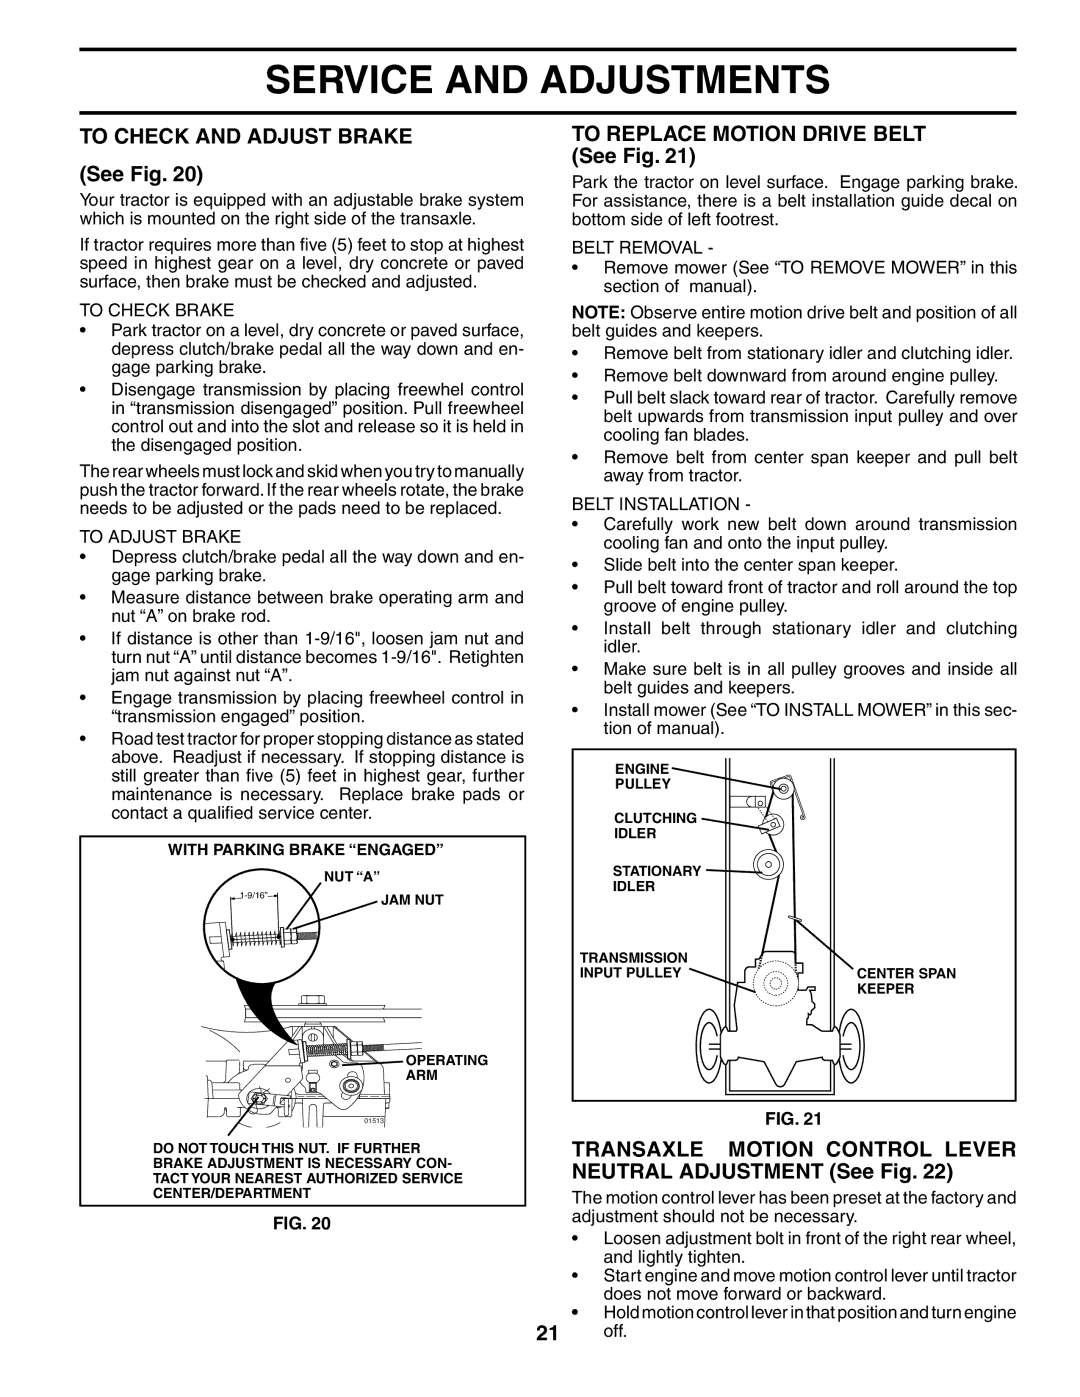 Poulan 197022 manual To Check and Adjust Brake, To Replace Motion Drive Belt See Fig 